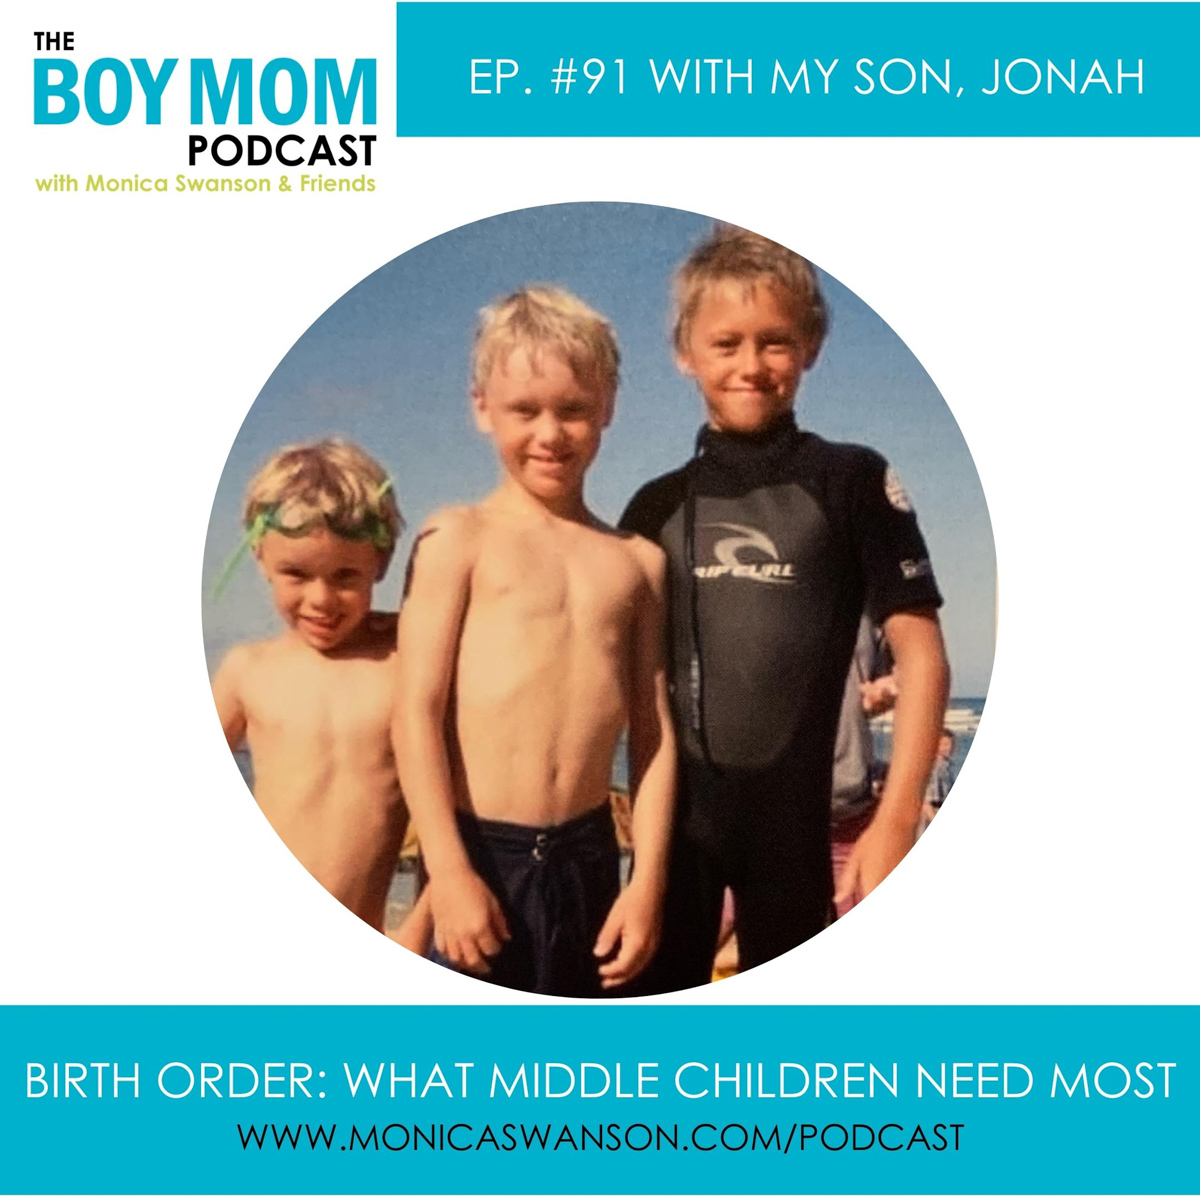 Let’s Talk Middle Children {Episode 91, with my son, Jonah}